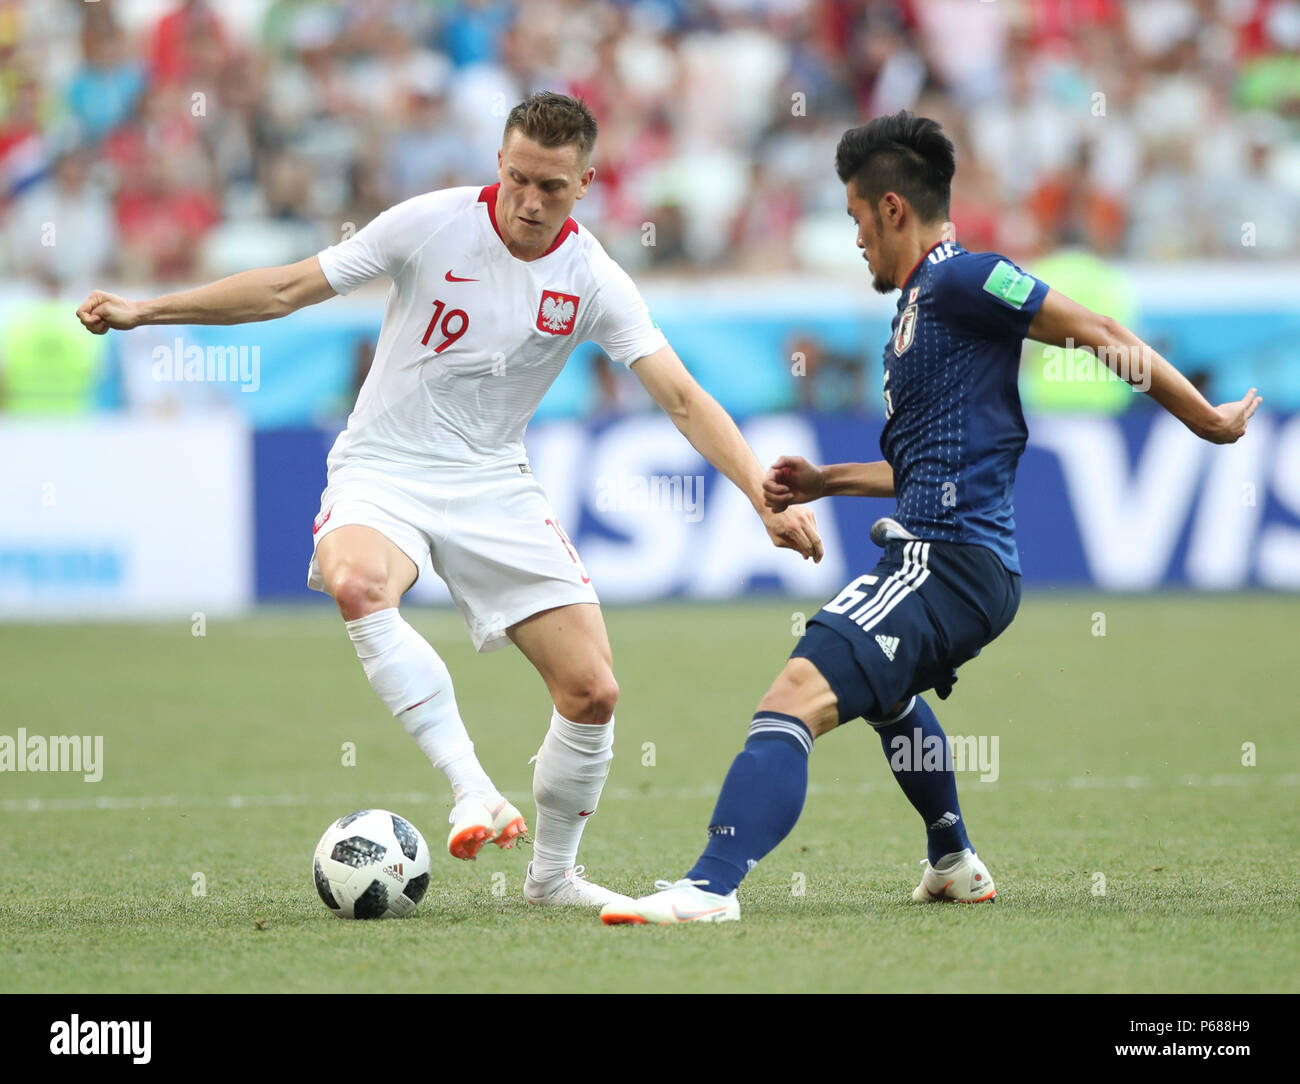 Volgograd, Russia. 28th June, 2018. Piotr Zielinski (L) of Poland vies with Hotaru Yamaguchi of Japan during the 2018 FIFA World Cup Group H match between Japan and Poland in Volgograd, Russia, June 28, 2018. Credit: Wu Zhuang/Xinhua/Alamy Live News Stock Photo